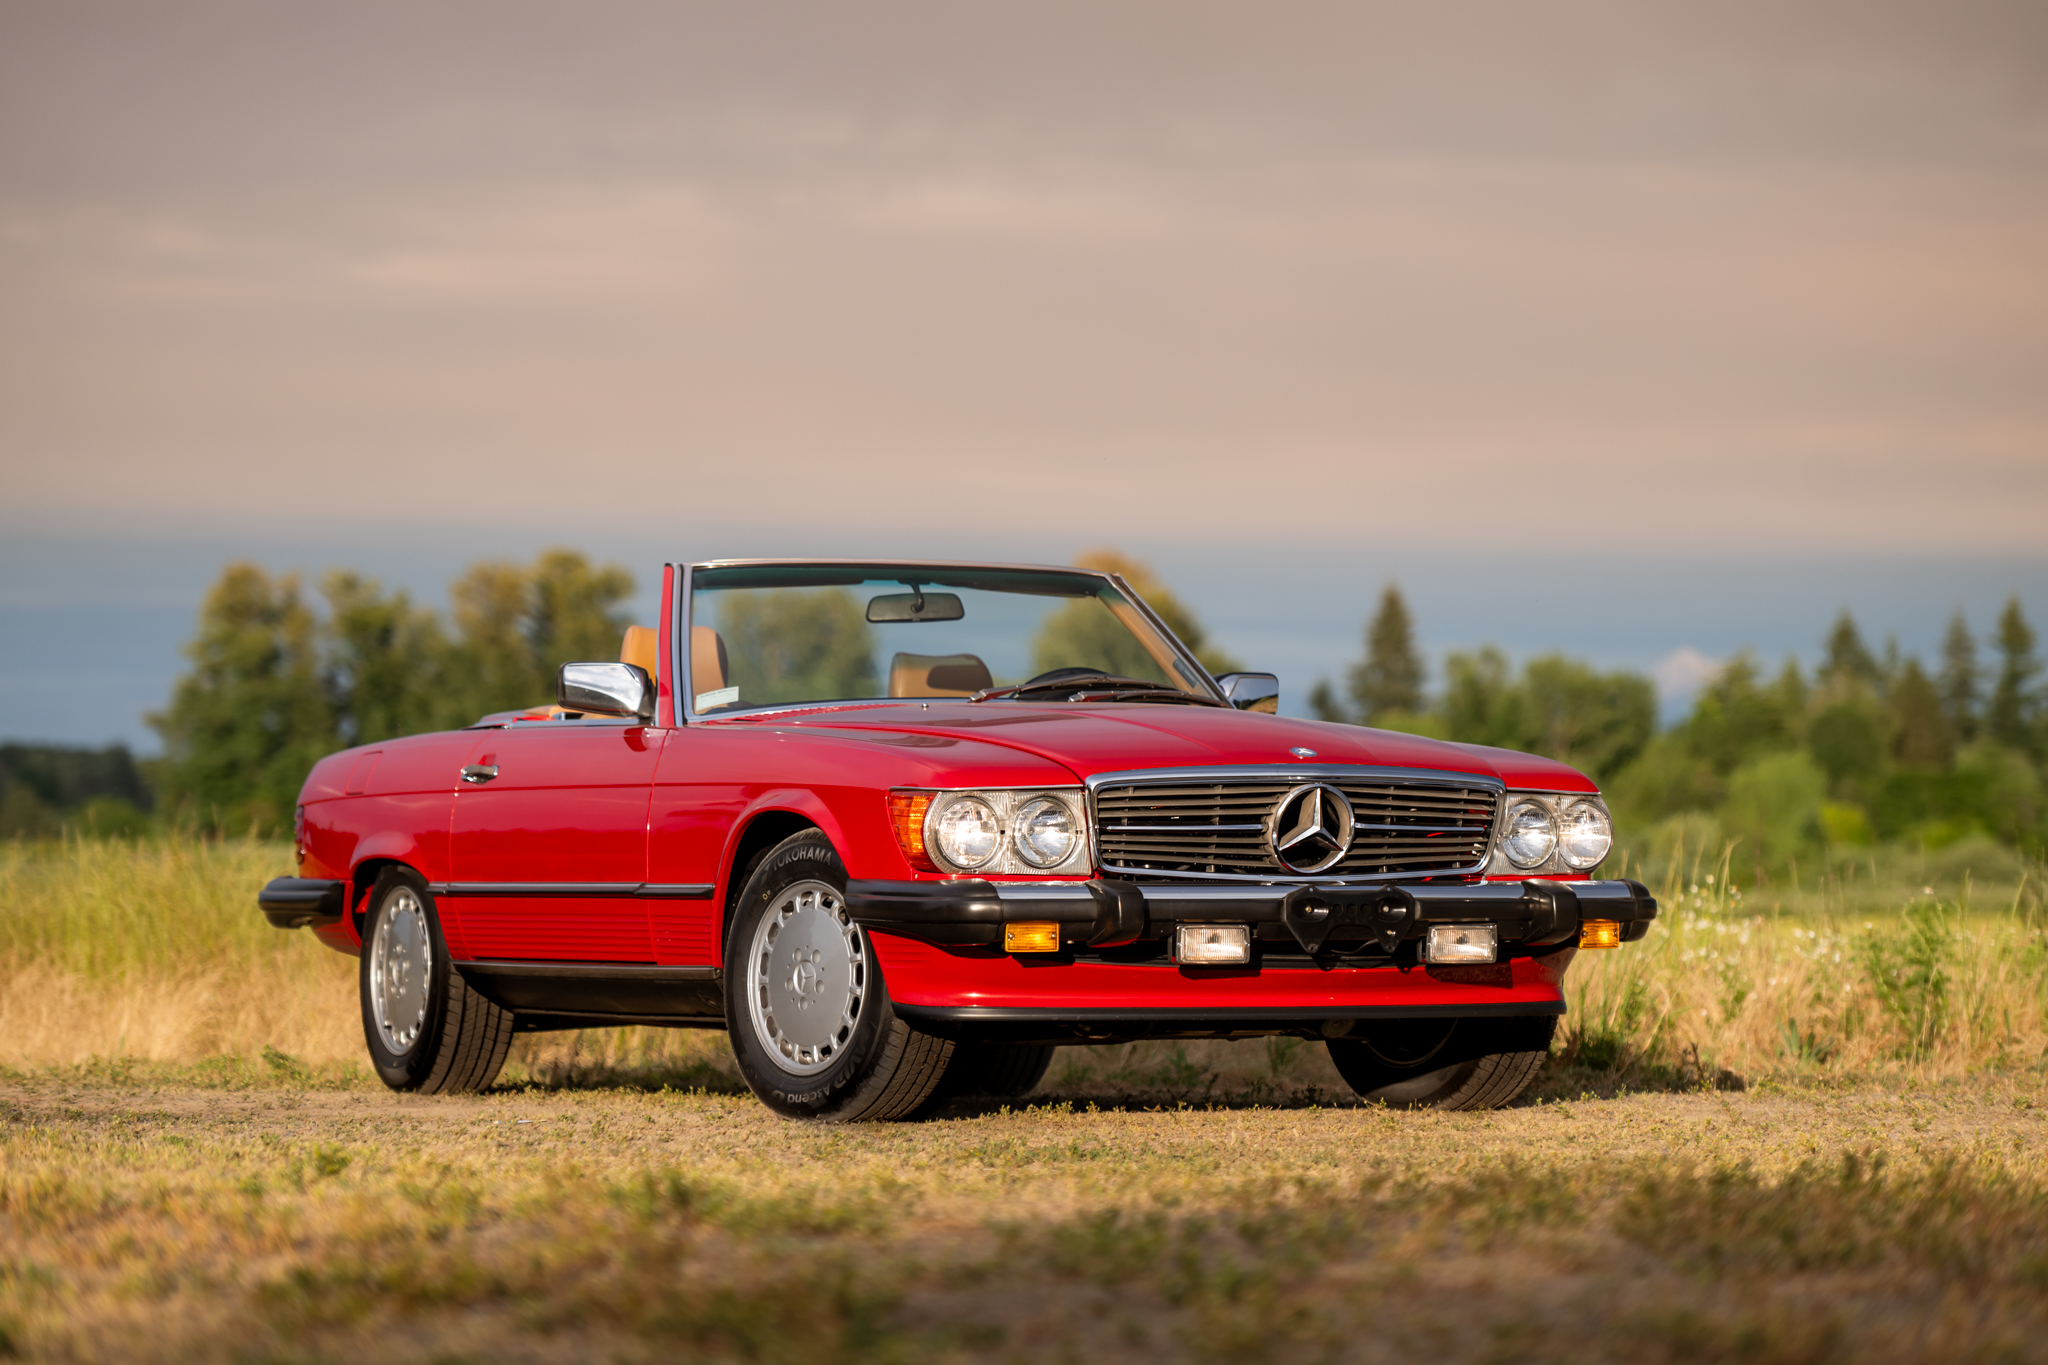 Used 1989 Mercedes-Benz 560SL Review